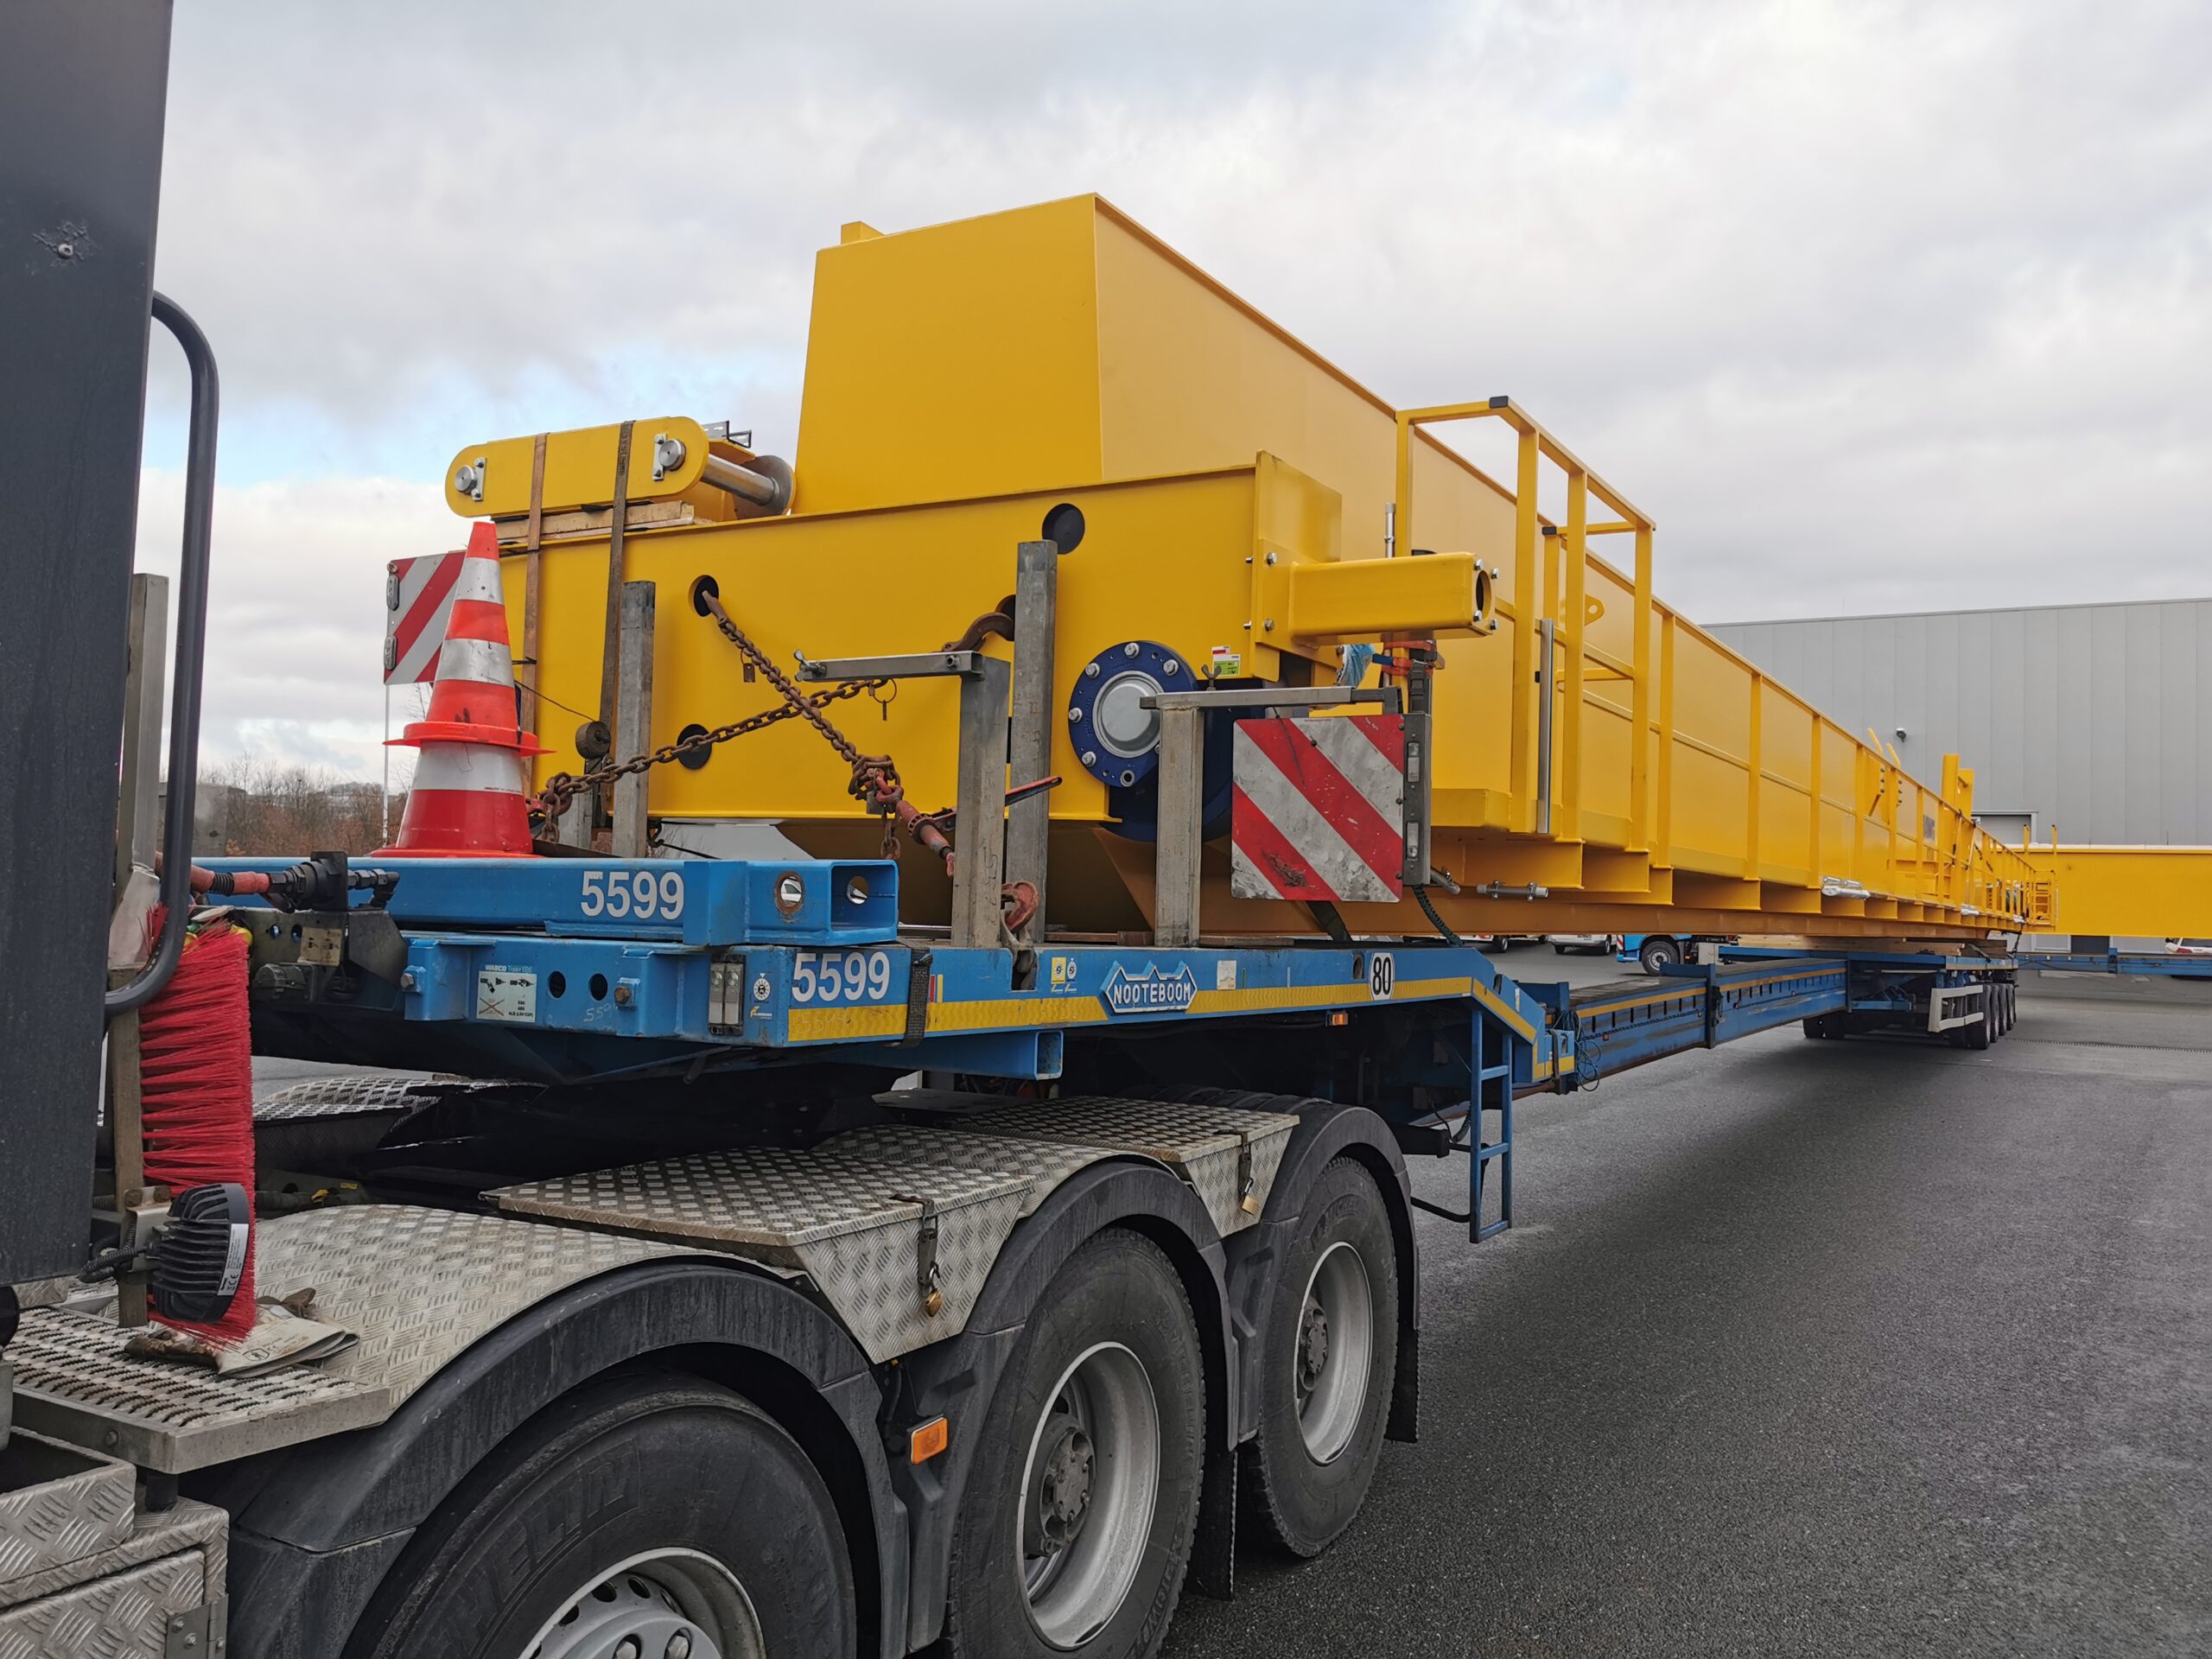 7WL finished delivery of overdimensional crane girder incl. equipment to Hungary